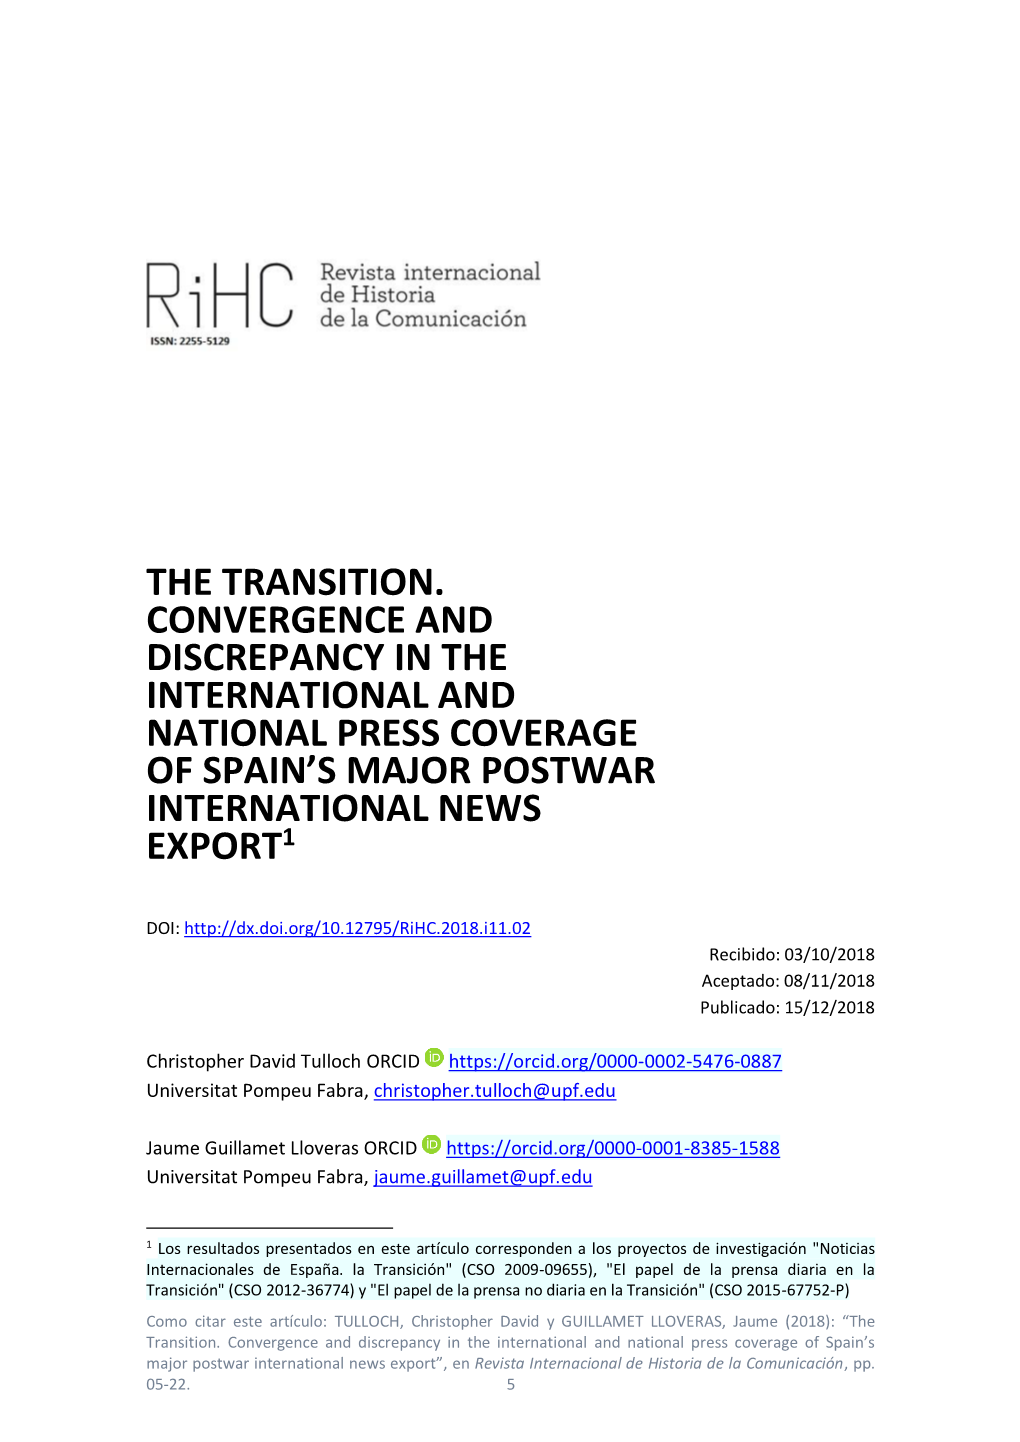 The Transition. Convergence and Discrepancy in the International and National Press Coverage of Spain’S Major Postwar International News Export1